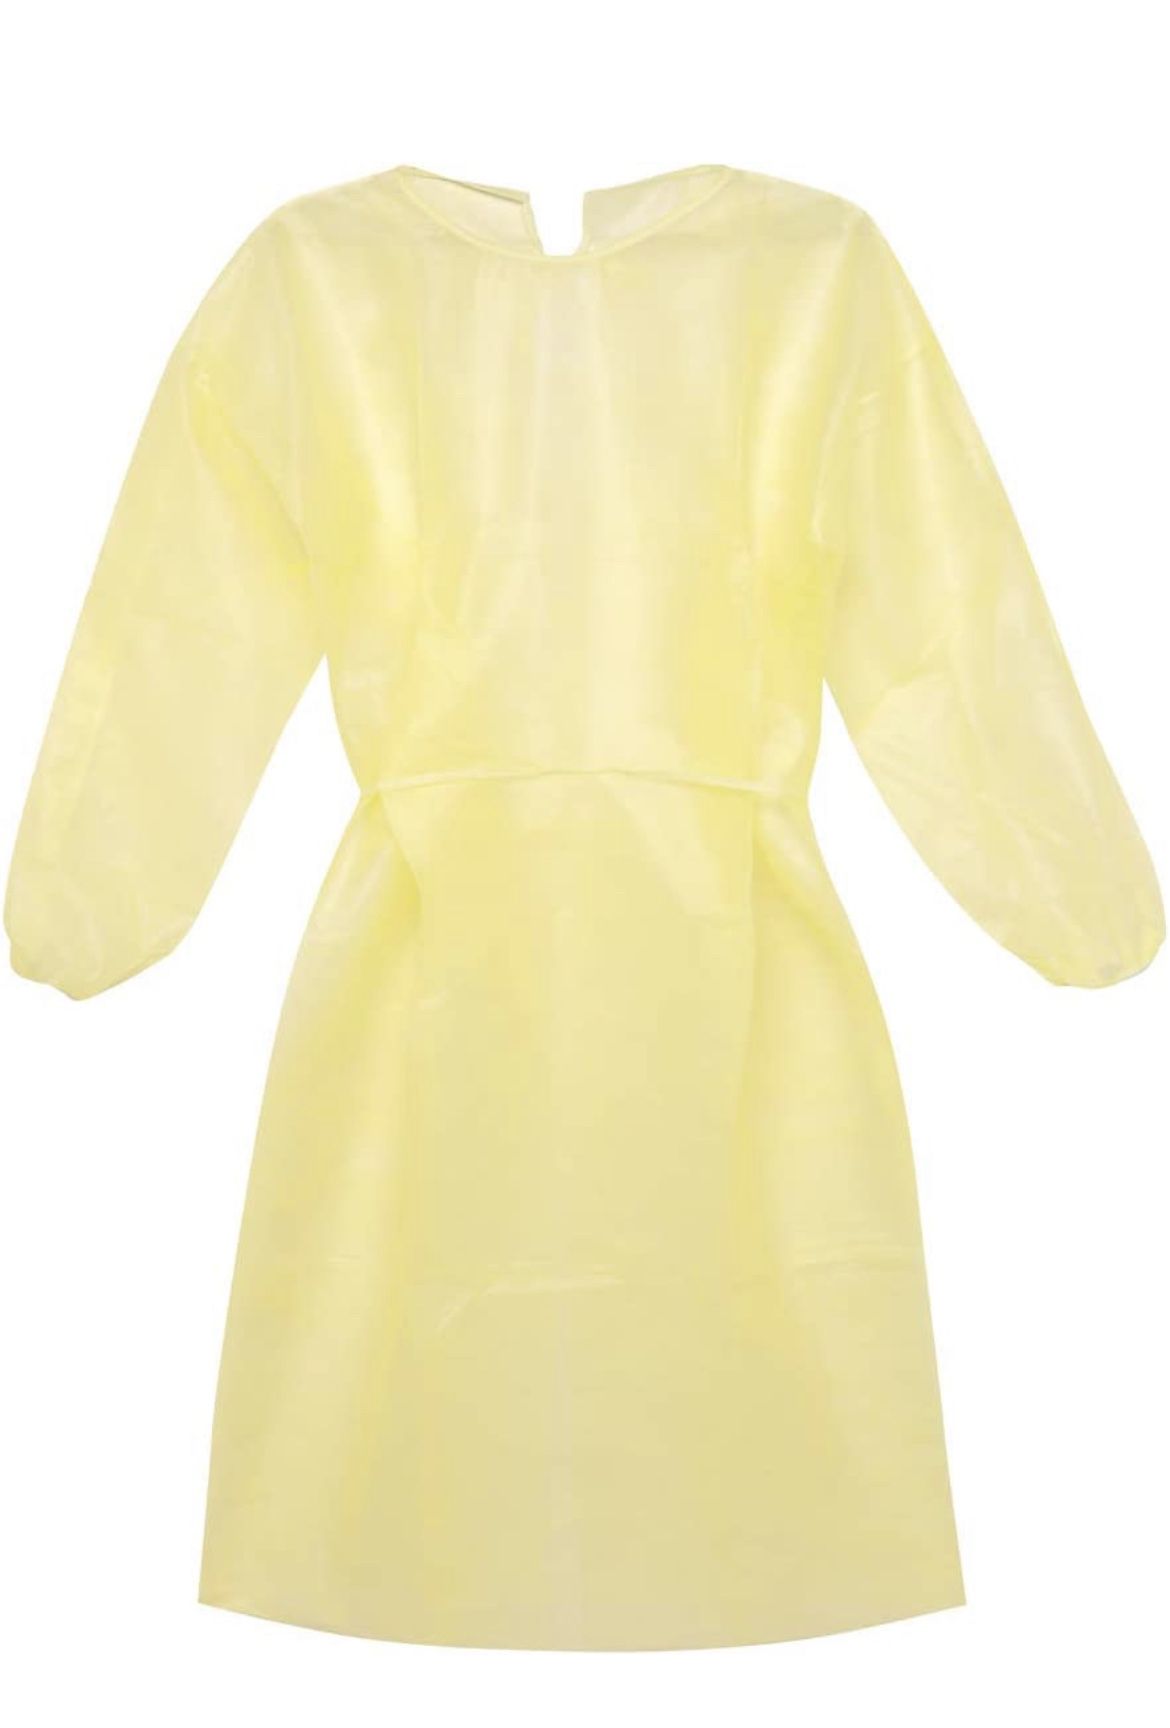 50 reusable/launderable isolation gown long sleeve size l/xl